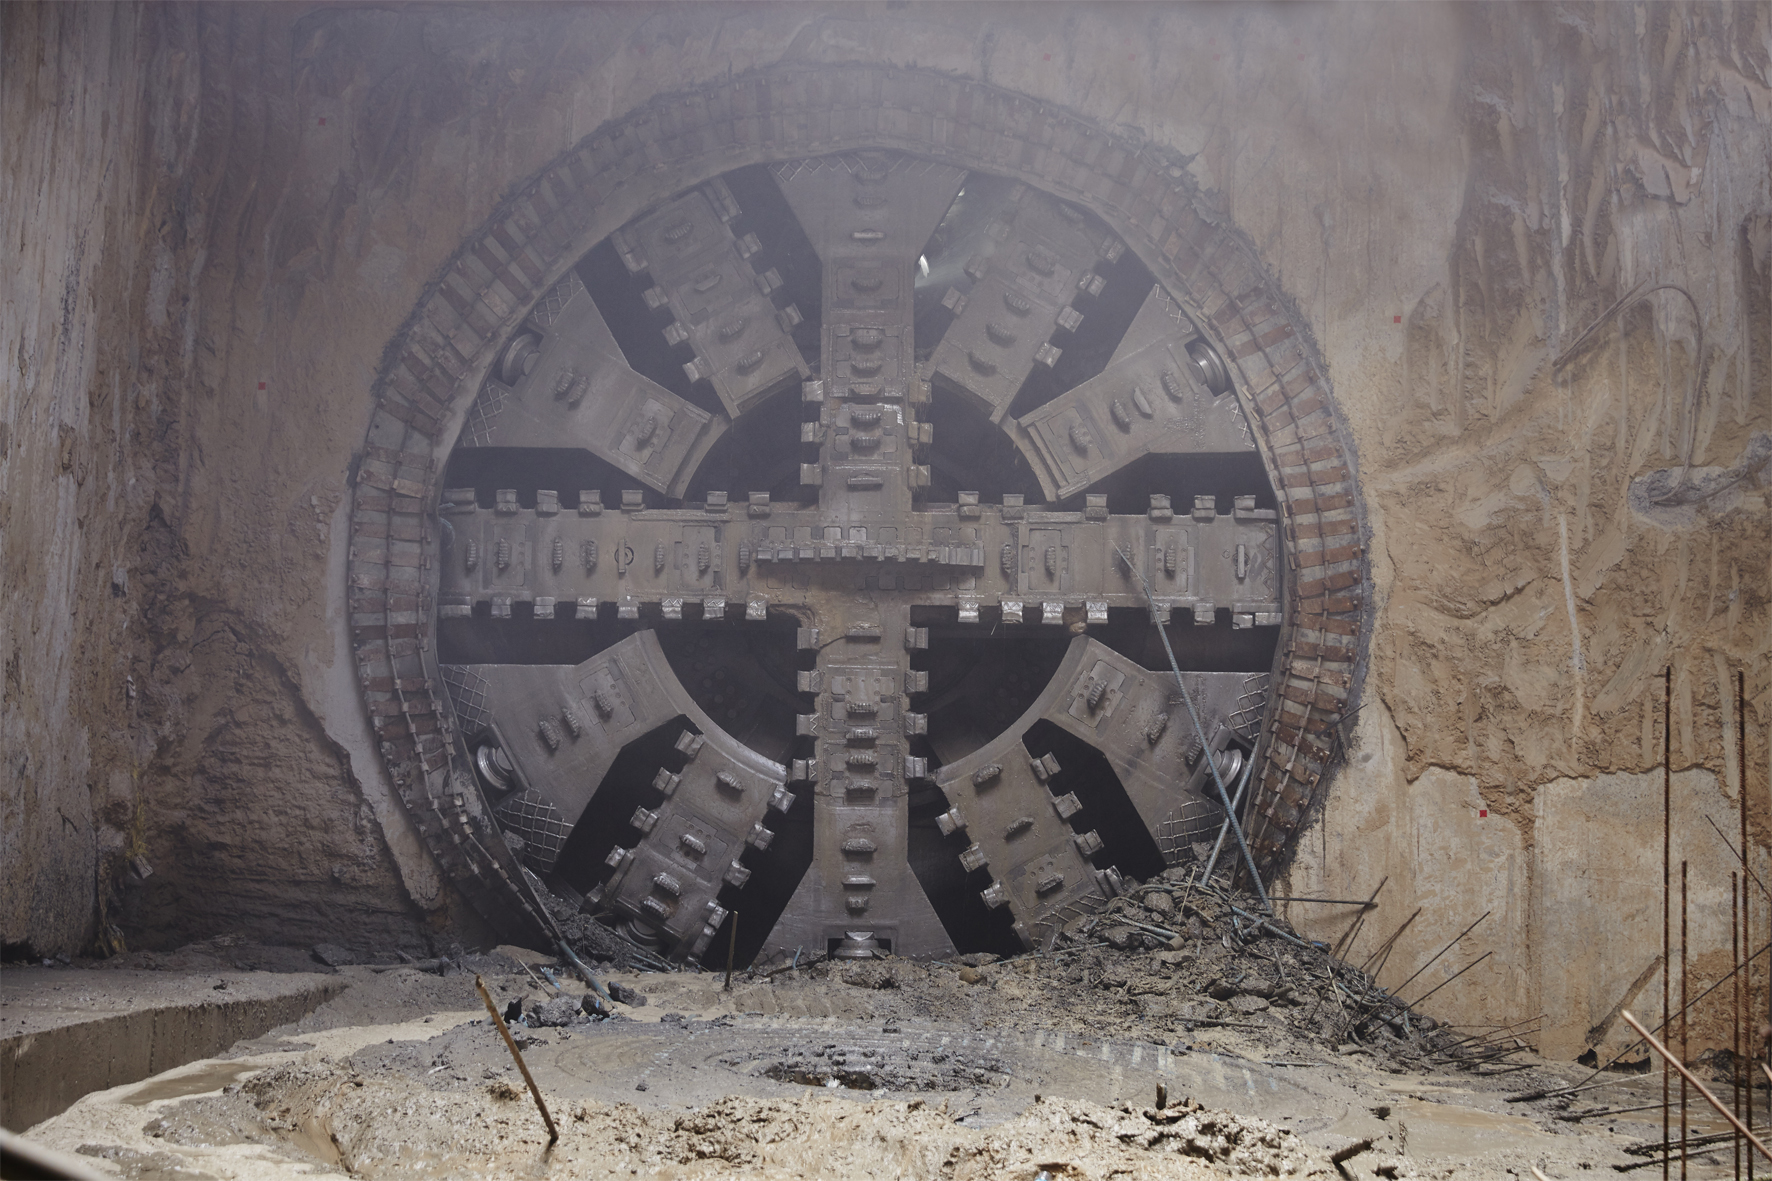 Tunnel Boring Machine in tunneling works in Delhi, India